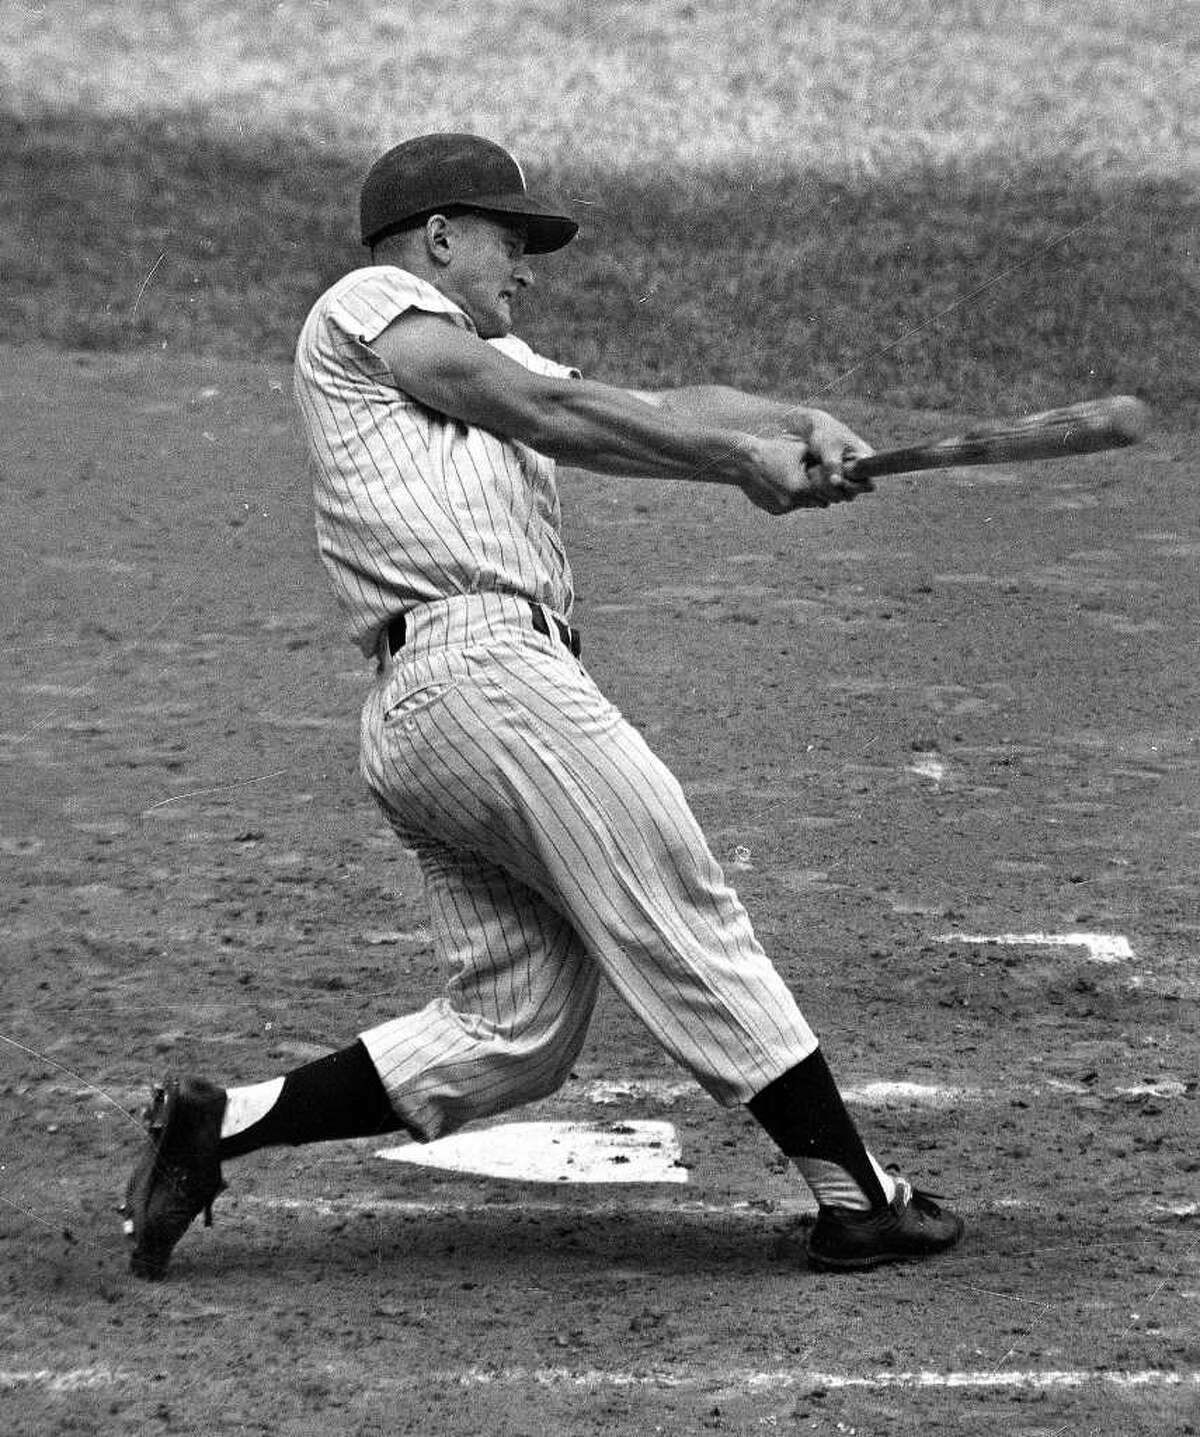 A Beeville reader was thrilled to read about the late Roger Maris in the Sept. 30 Sports section. Here, Maris belts his 61st home run, 50 years ago this month, to break Babe Ruth’s single season record. (AP Photo)